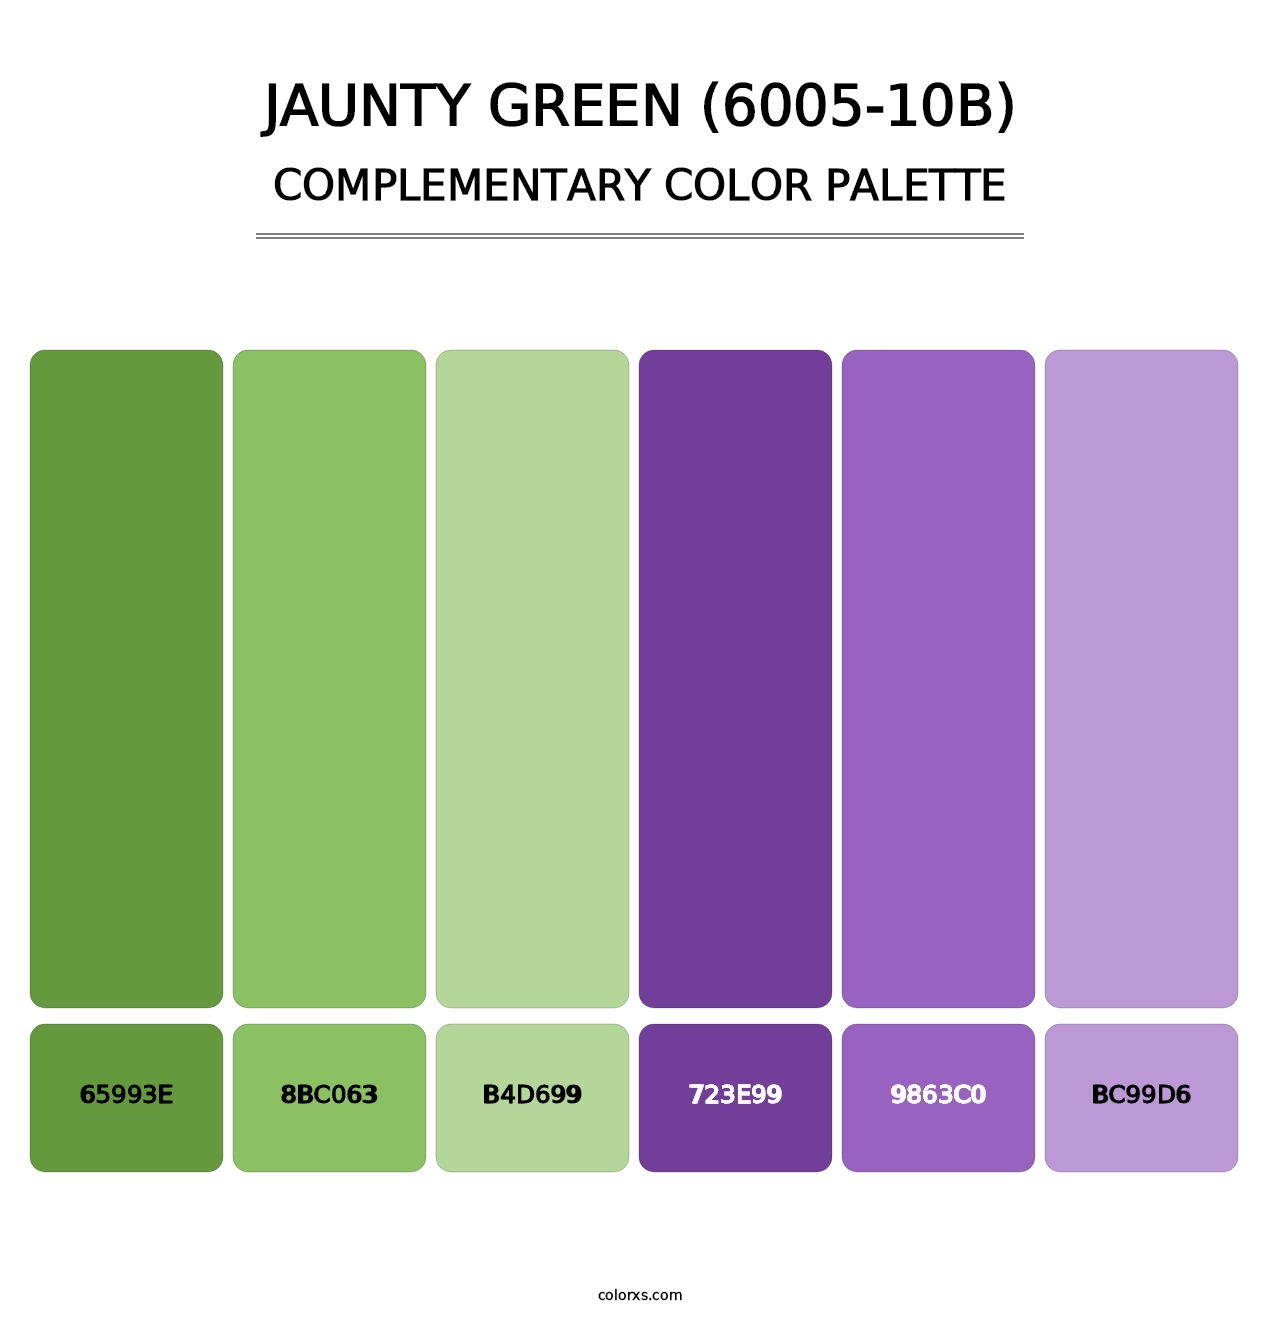 Jaunty Green (6005-10B) - Complementary Color Palette